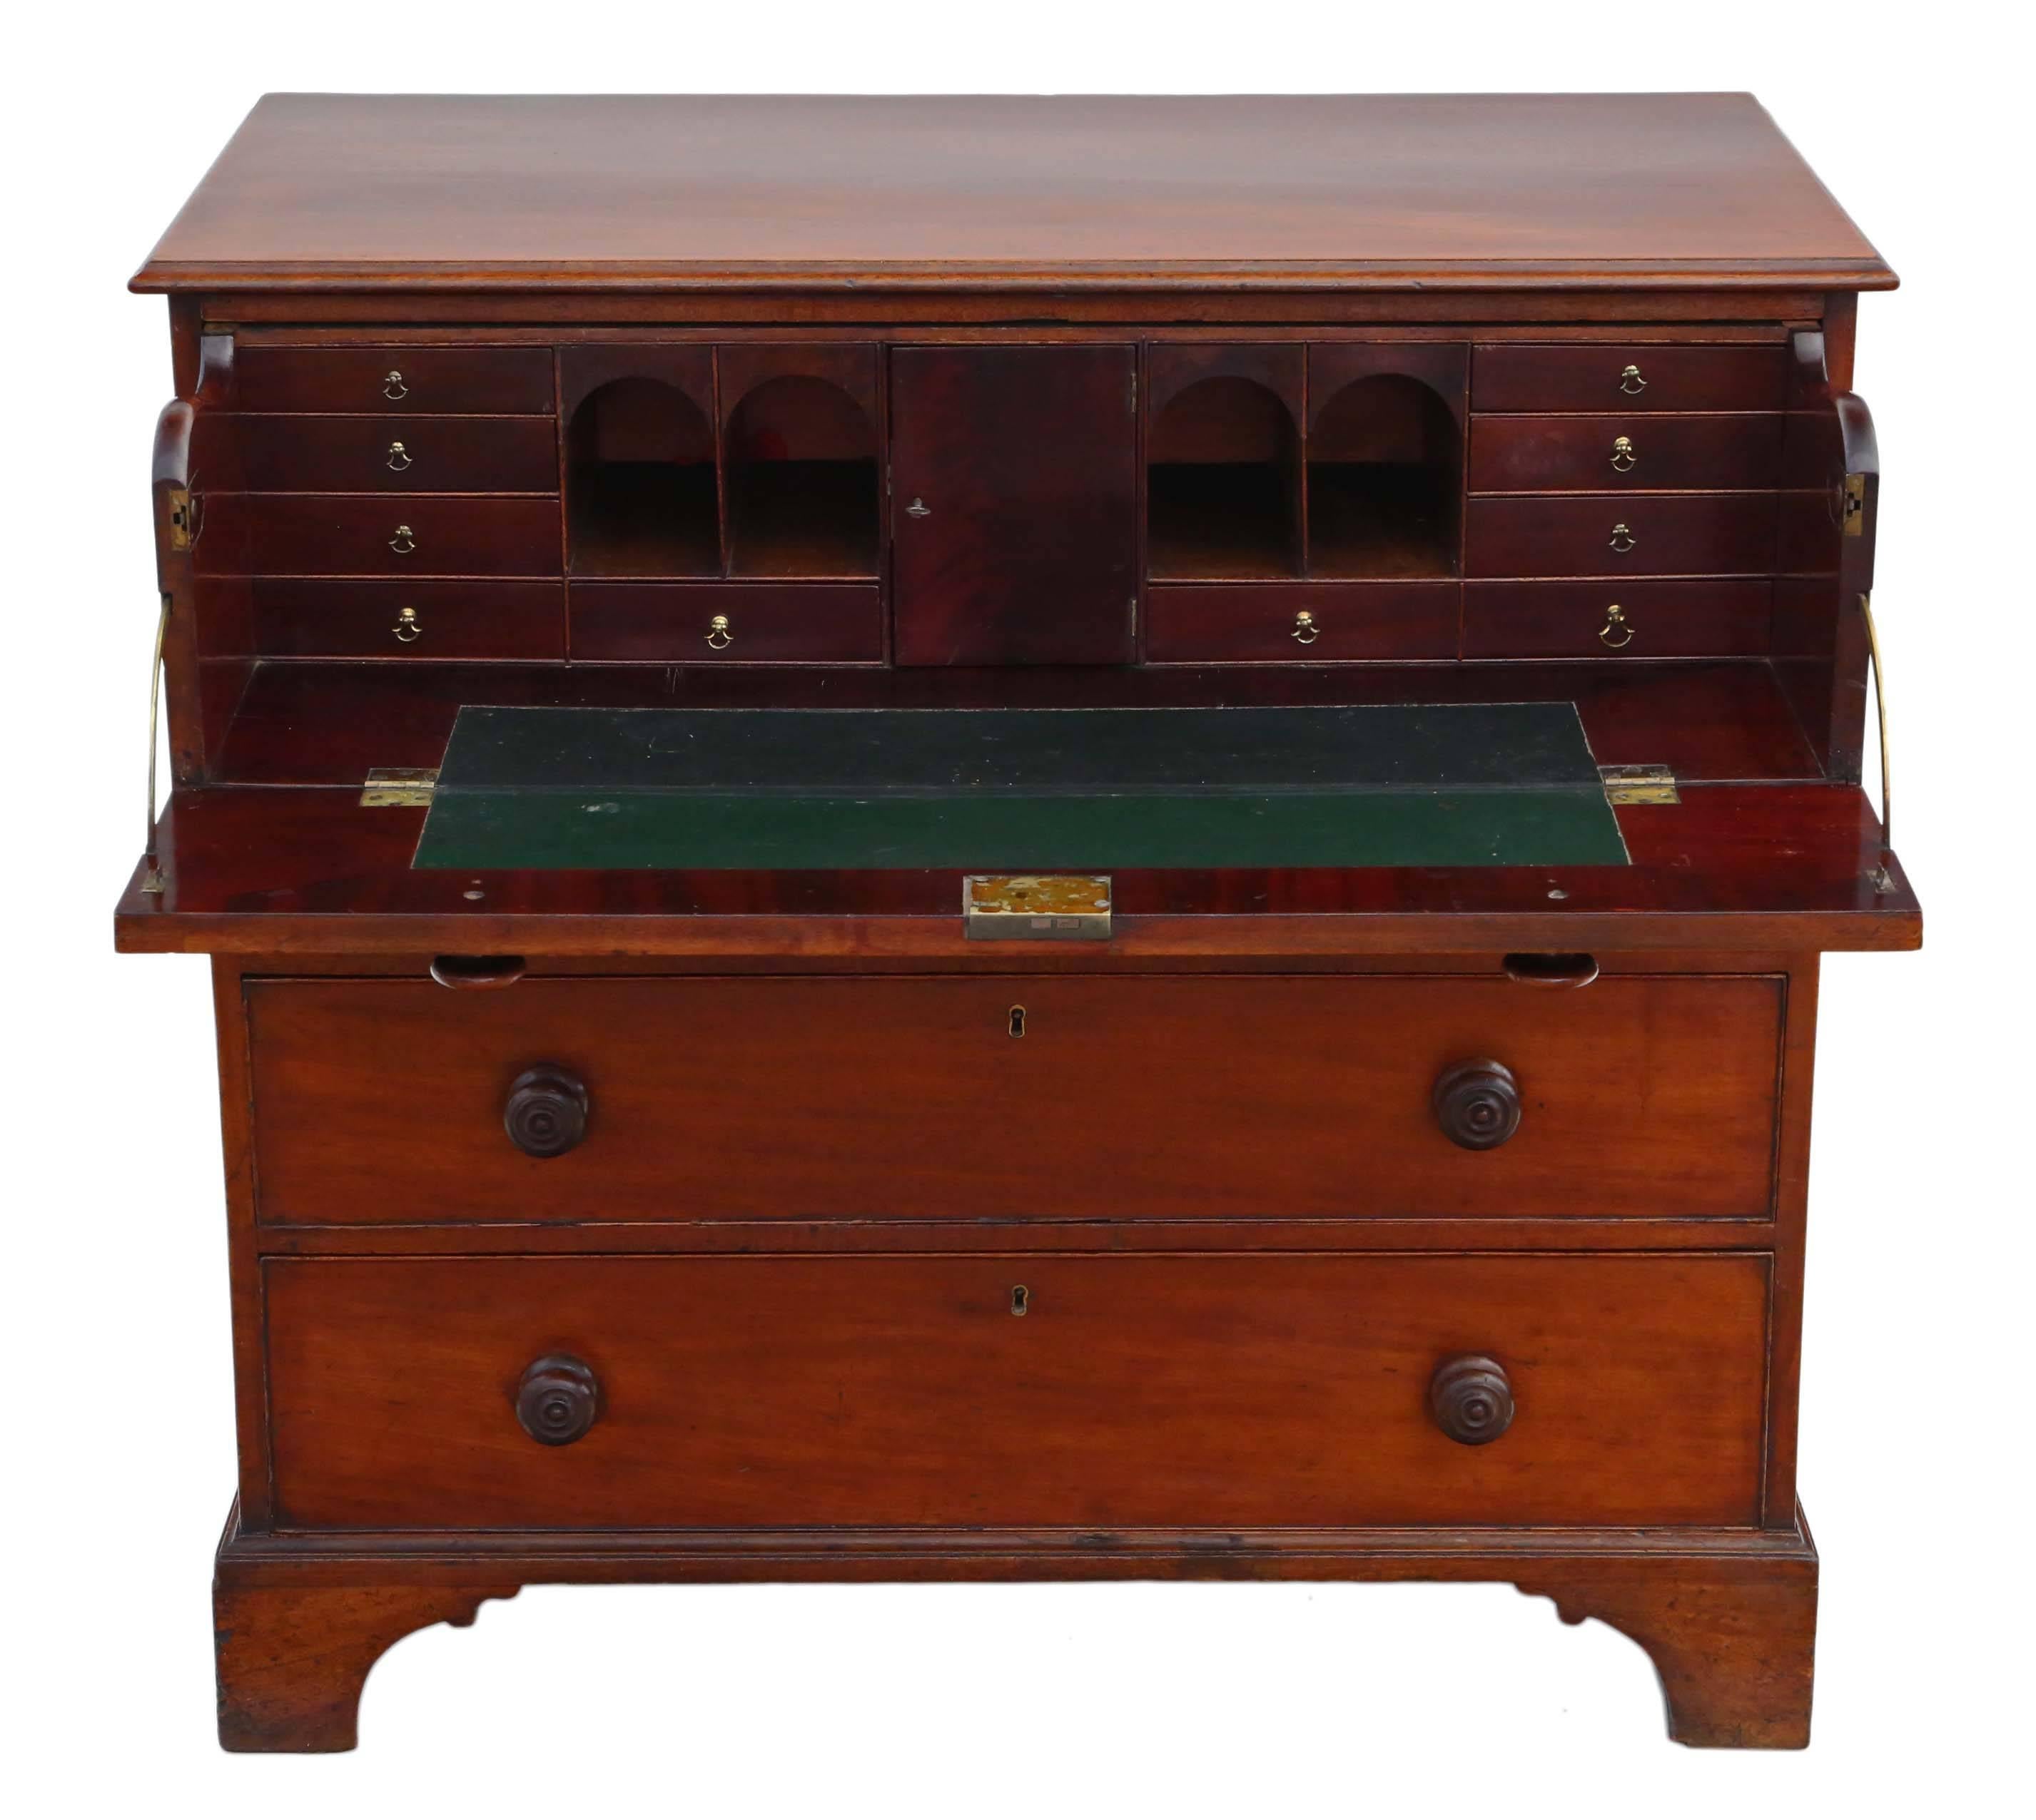 Antique Georgian Mahogany Secretaire Desk Writing Table Chest of Drawers In Good Condition For Sale In Wisbech, Walton Wisbech